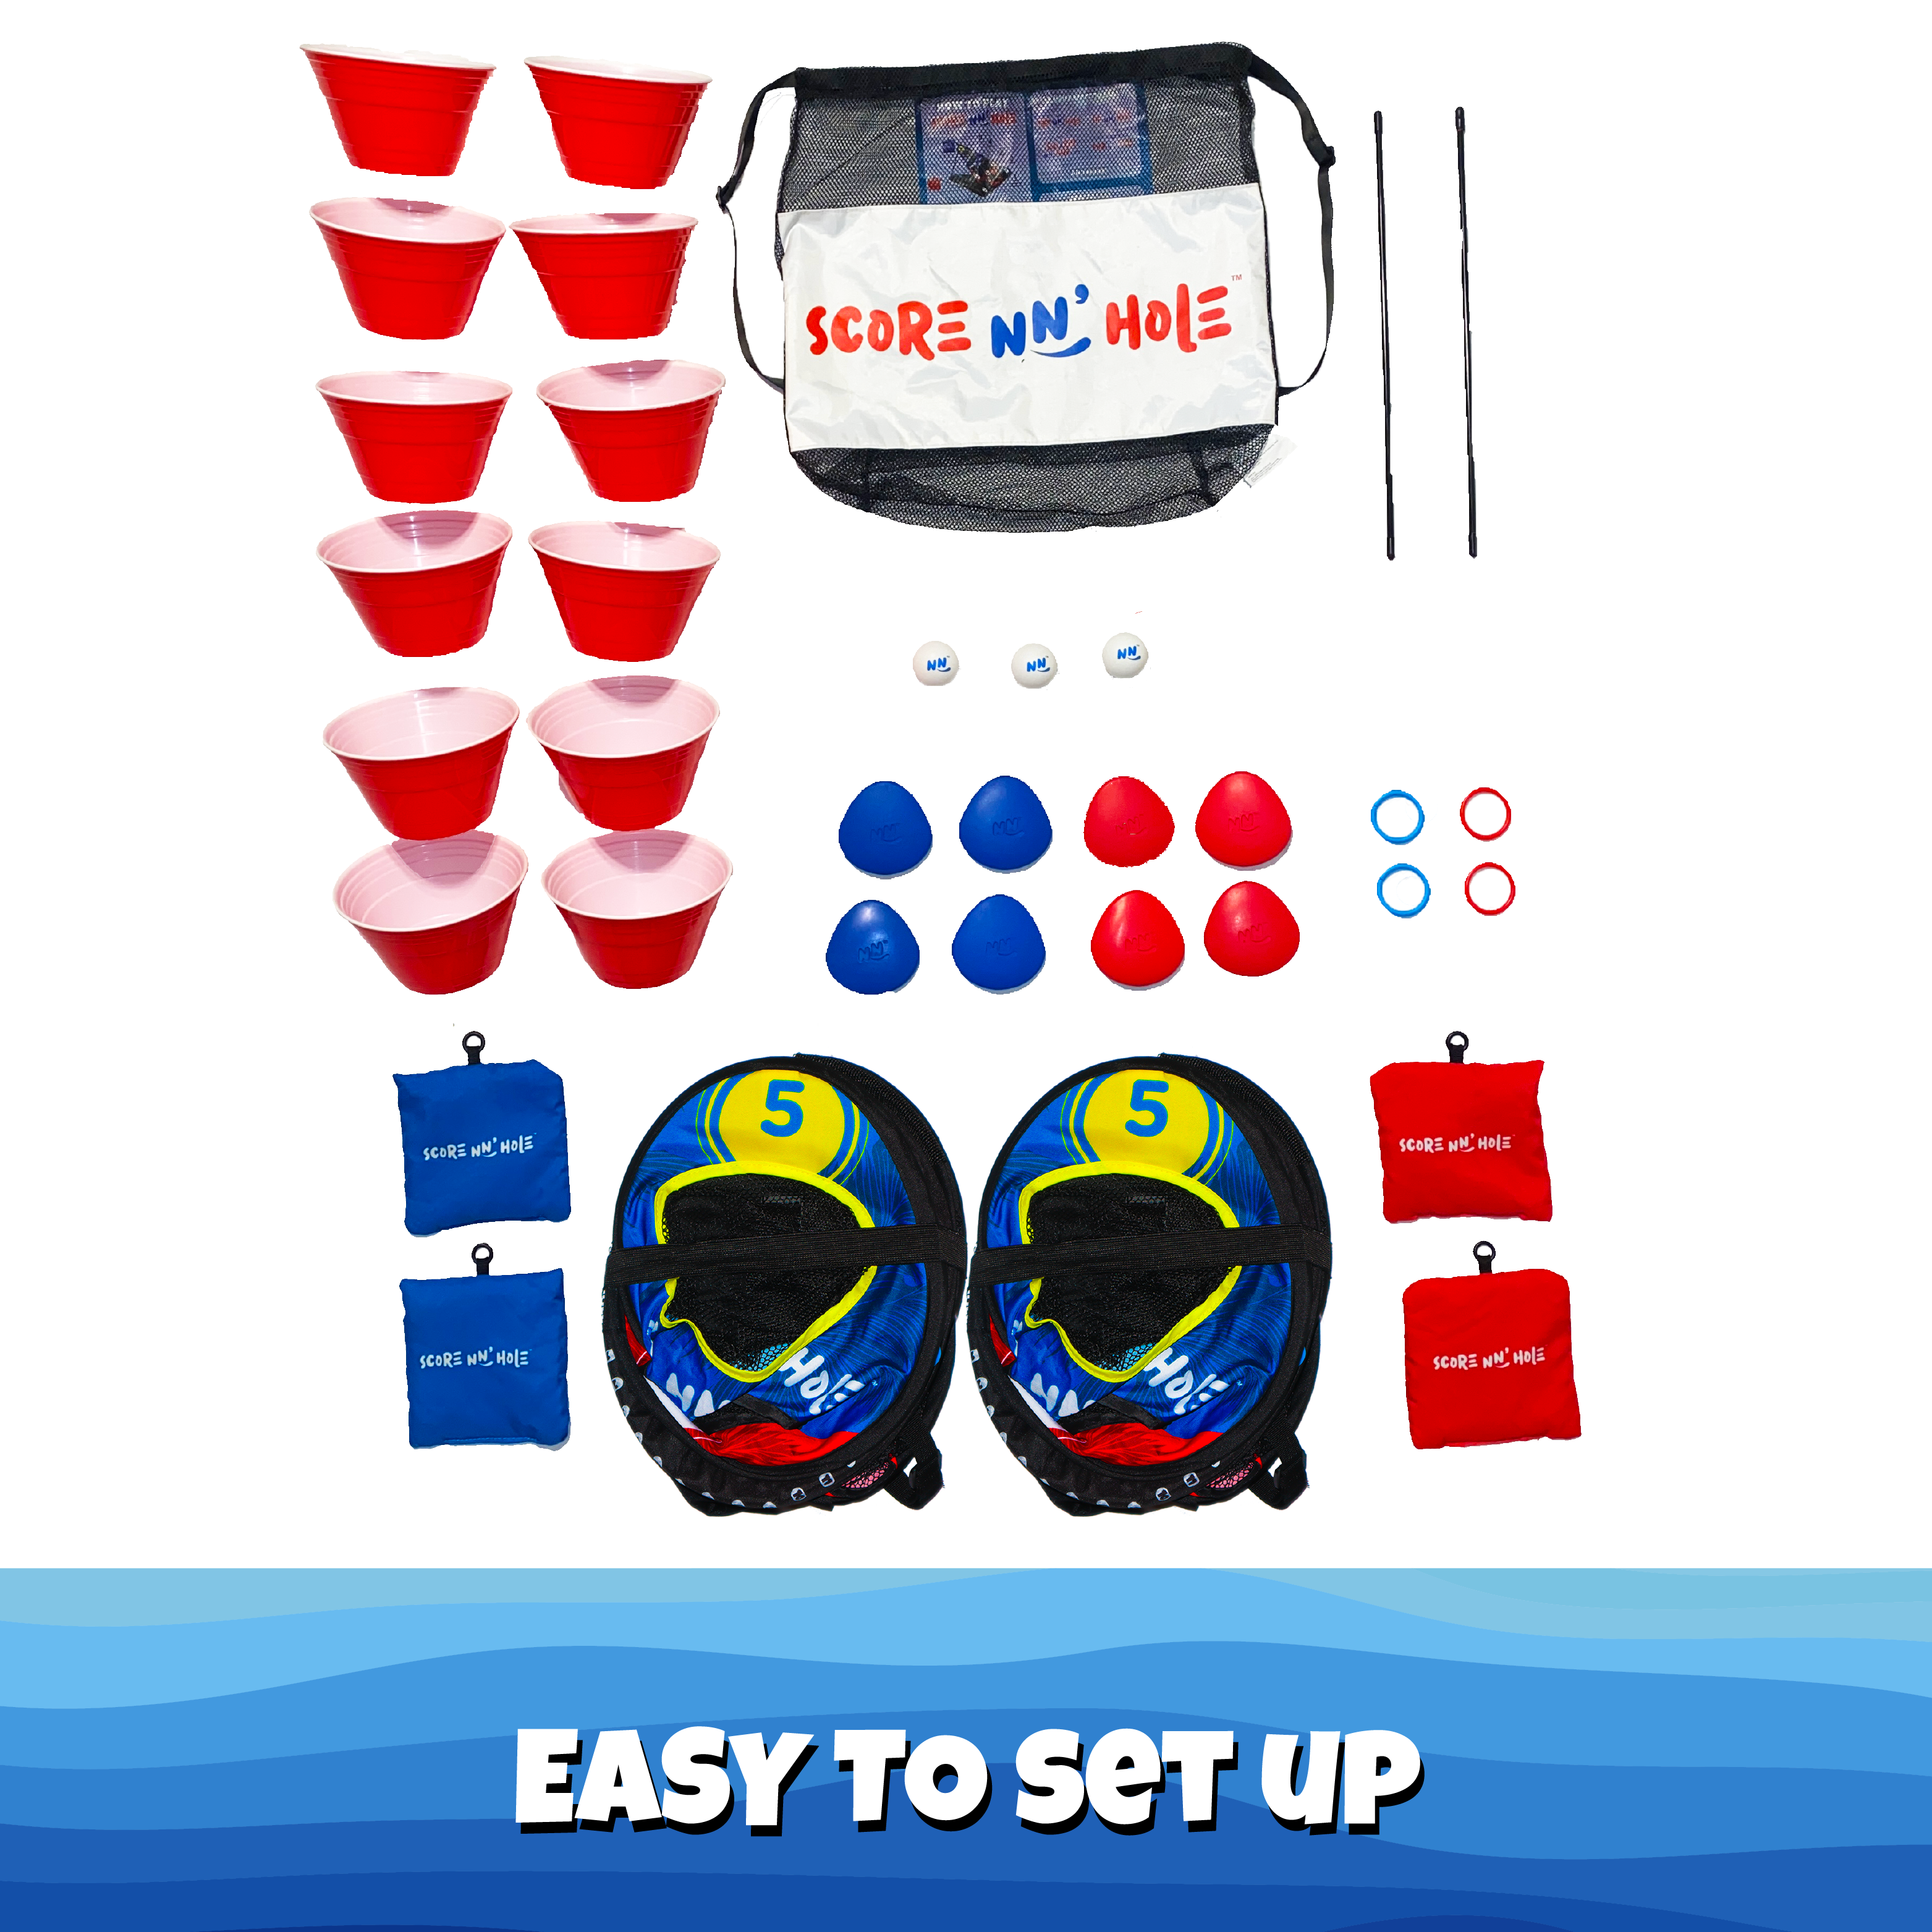 SKIP NN' HOLE + SIP NN' HOLE | Skipping Stones Meets Cornhole + Floating Beer Pong Game for Pool, Land, or Lake | The Ultimate Pool Party Game